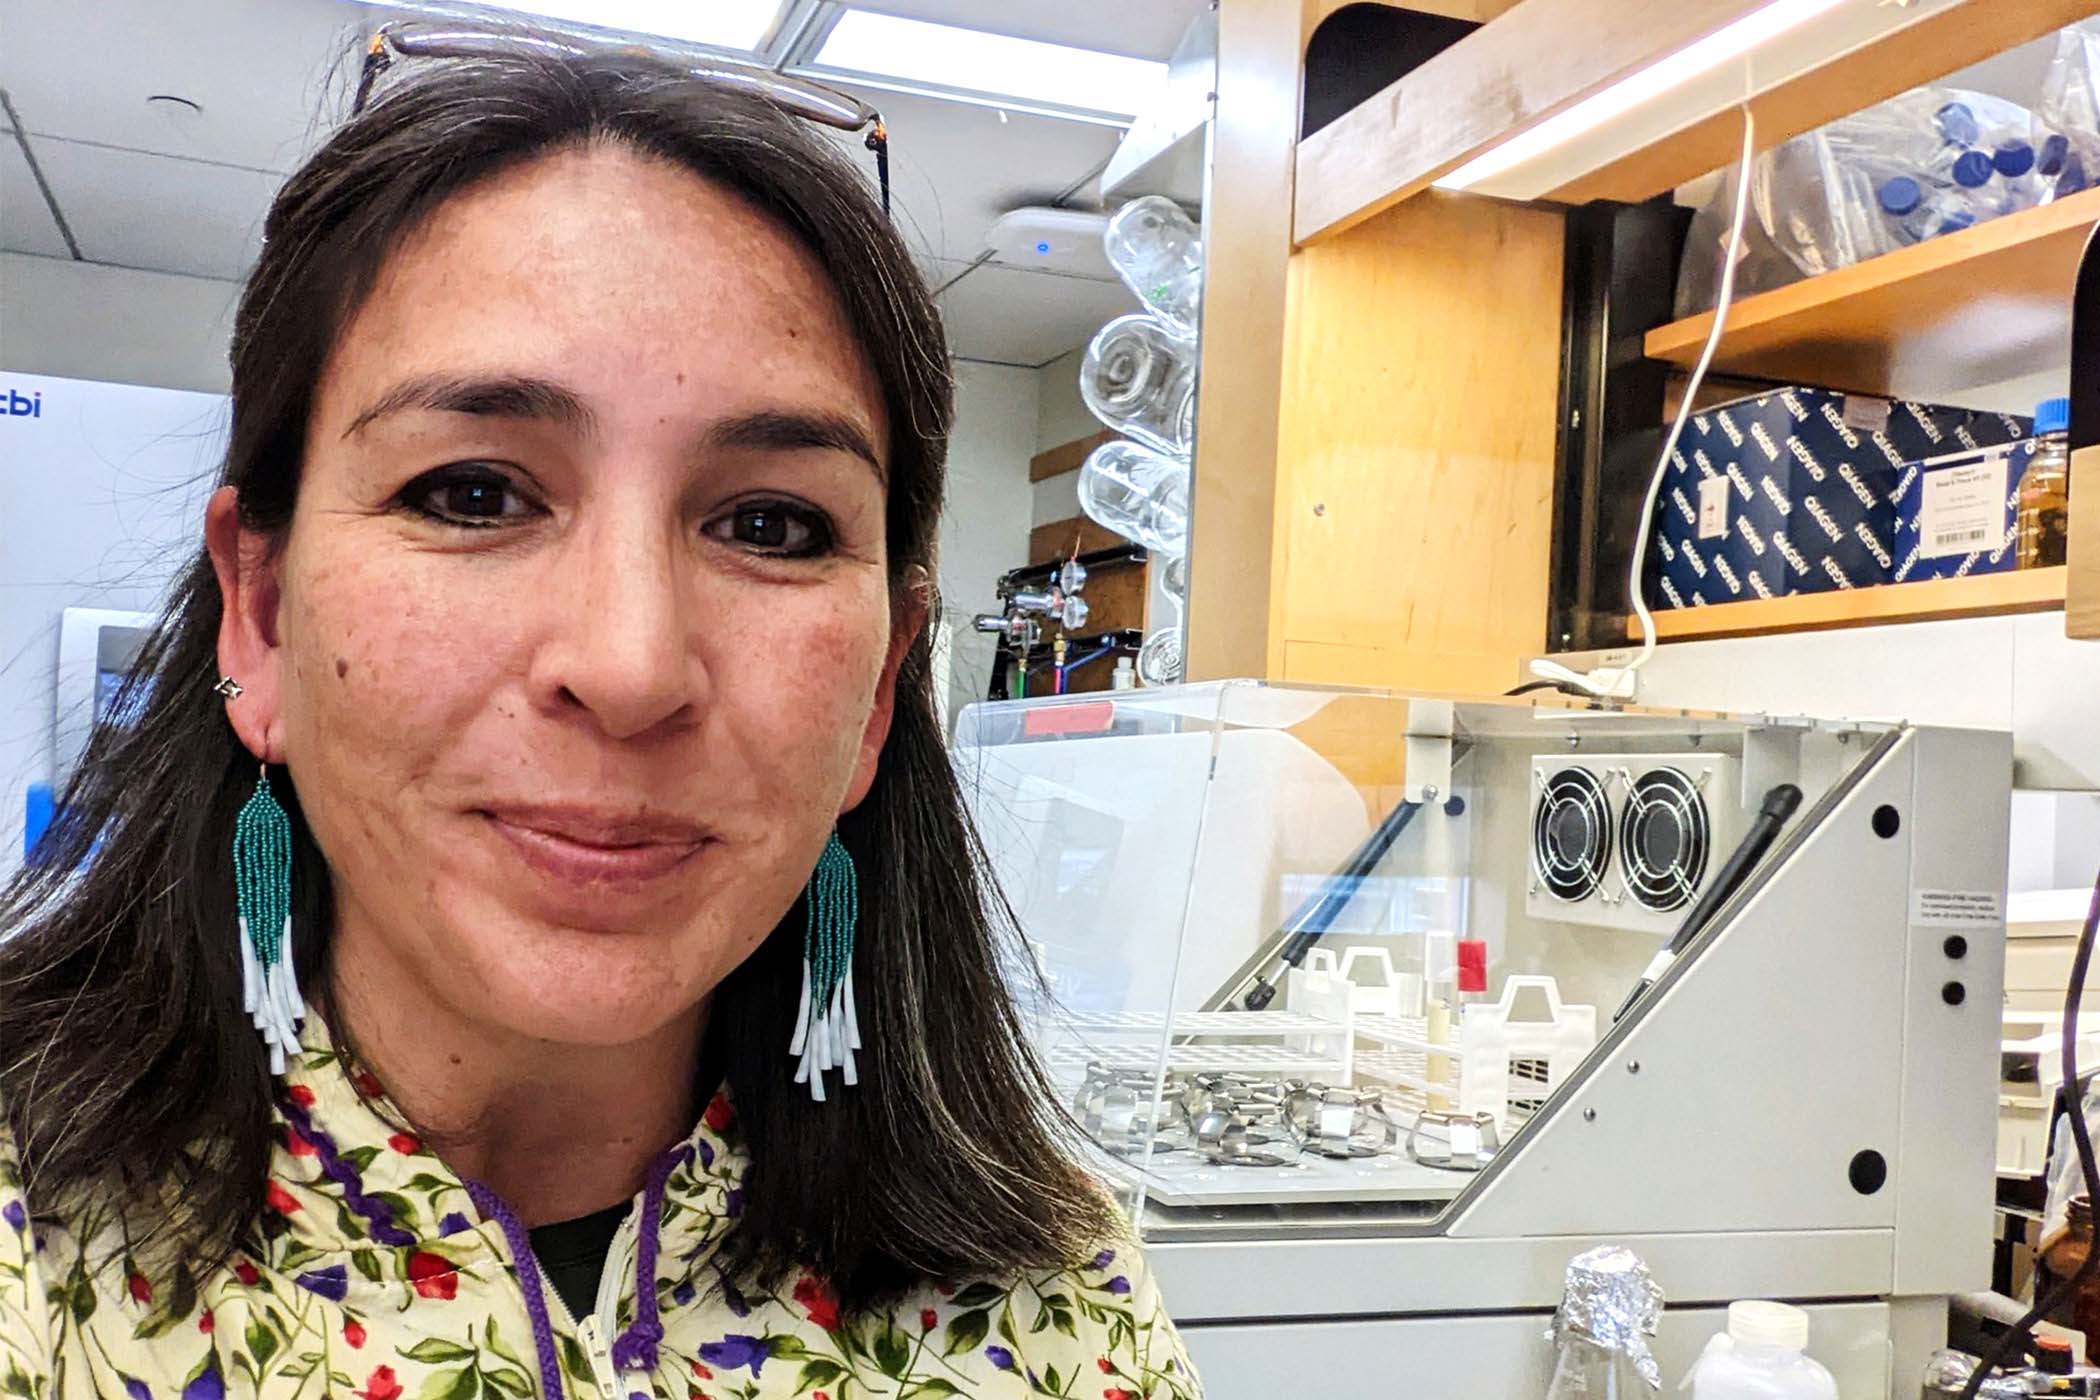 Dr. Kat Milligan-McClellan smiles directly at the camera. She is wearing a floral top. In the background is lab equipment, including test tubes.